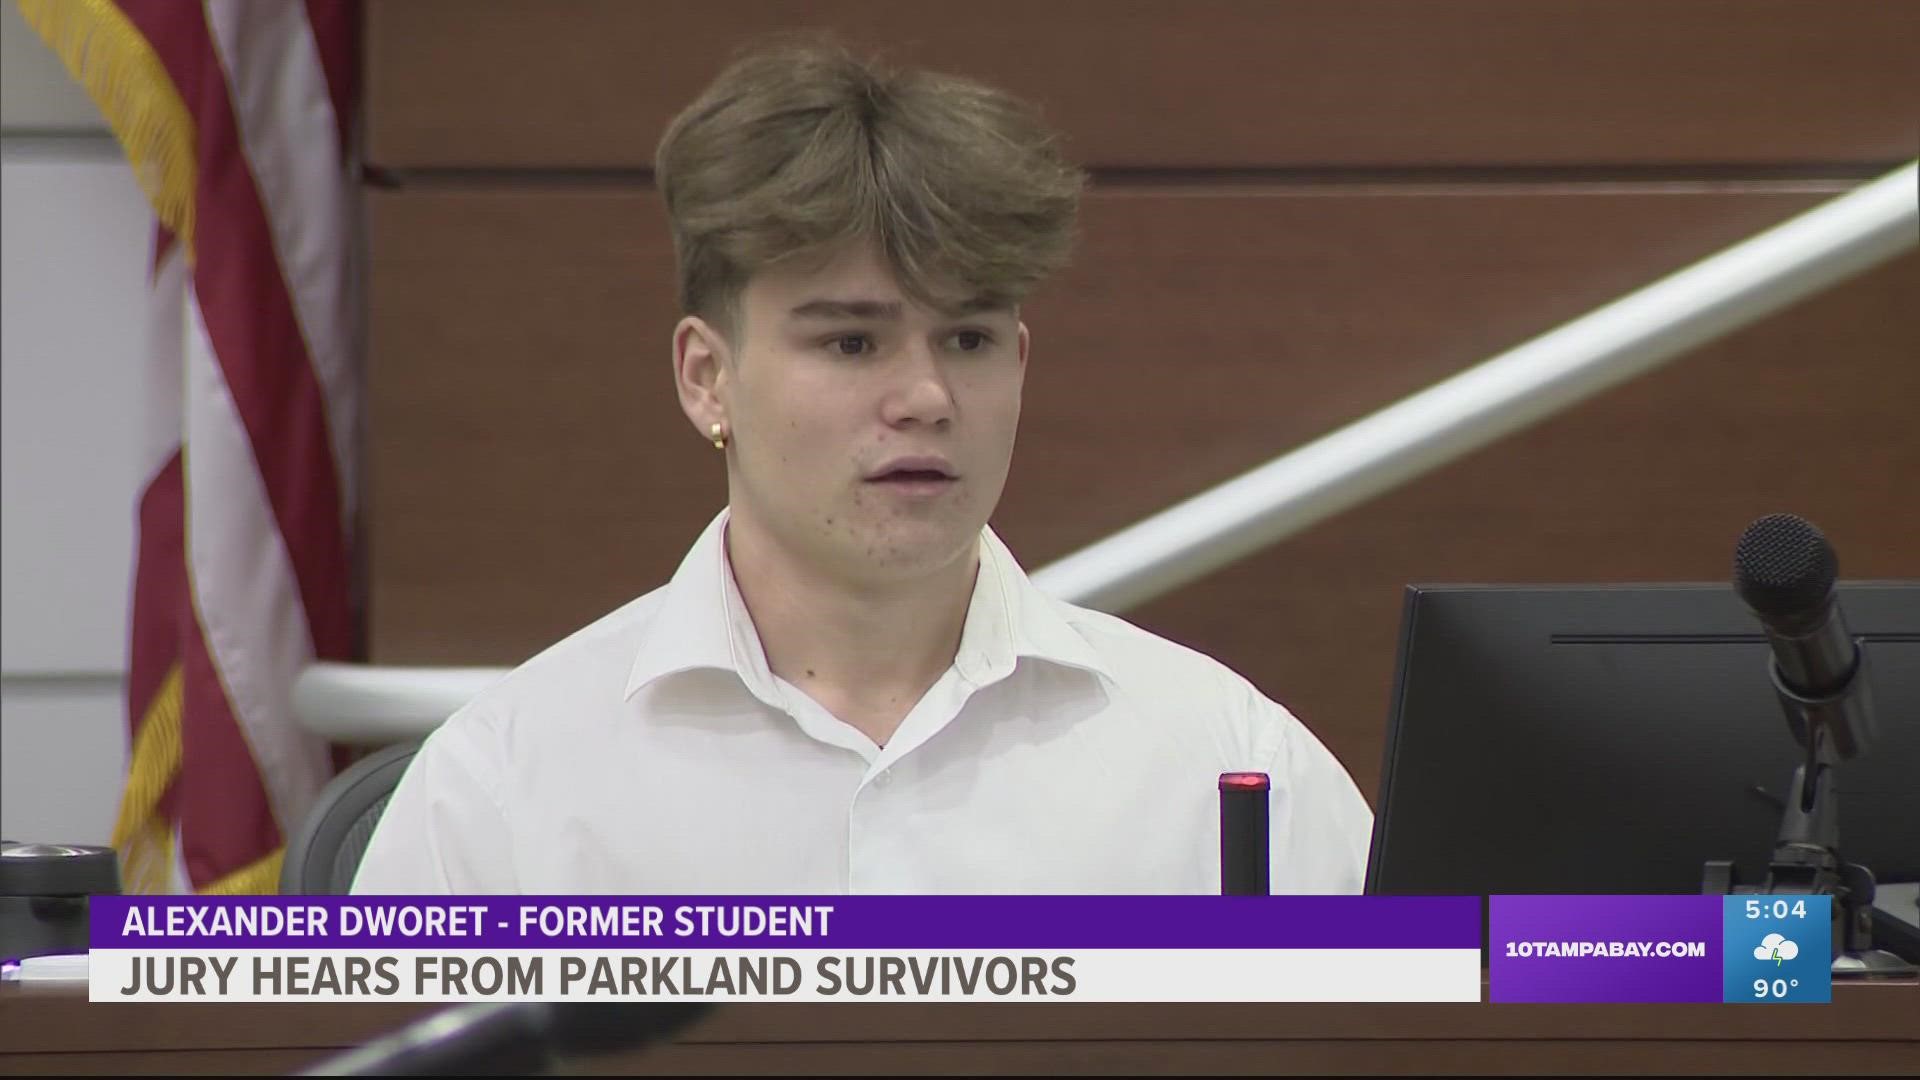 Prosecutors are using the video to prove several aggravating factors, including that shooter Nikolas Cruz acted in a cold, calculated and cruel manner.